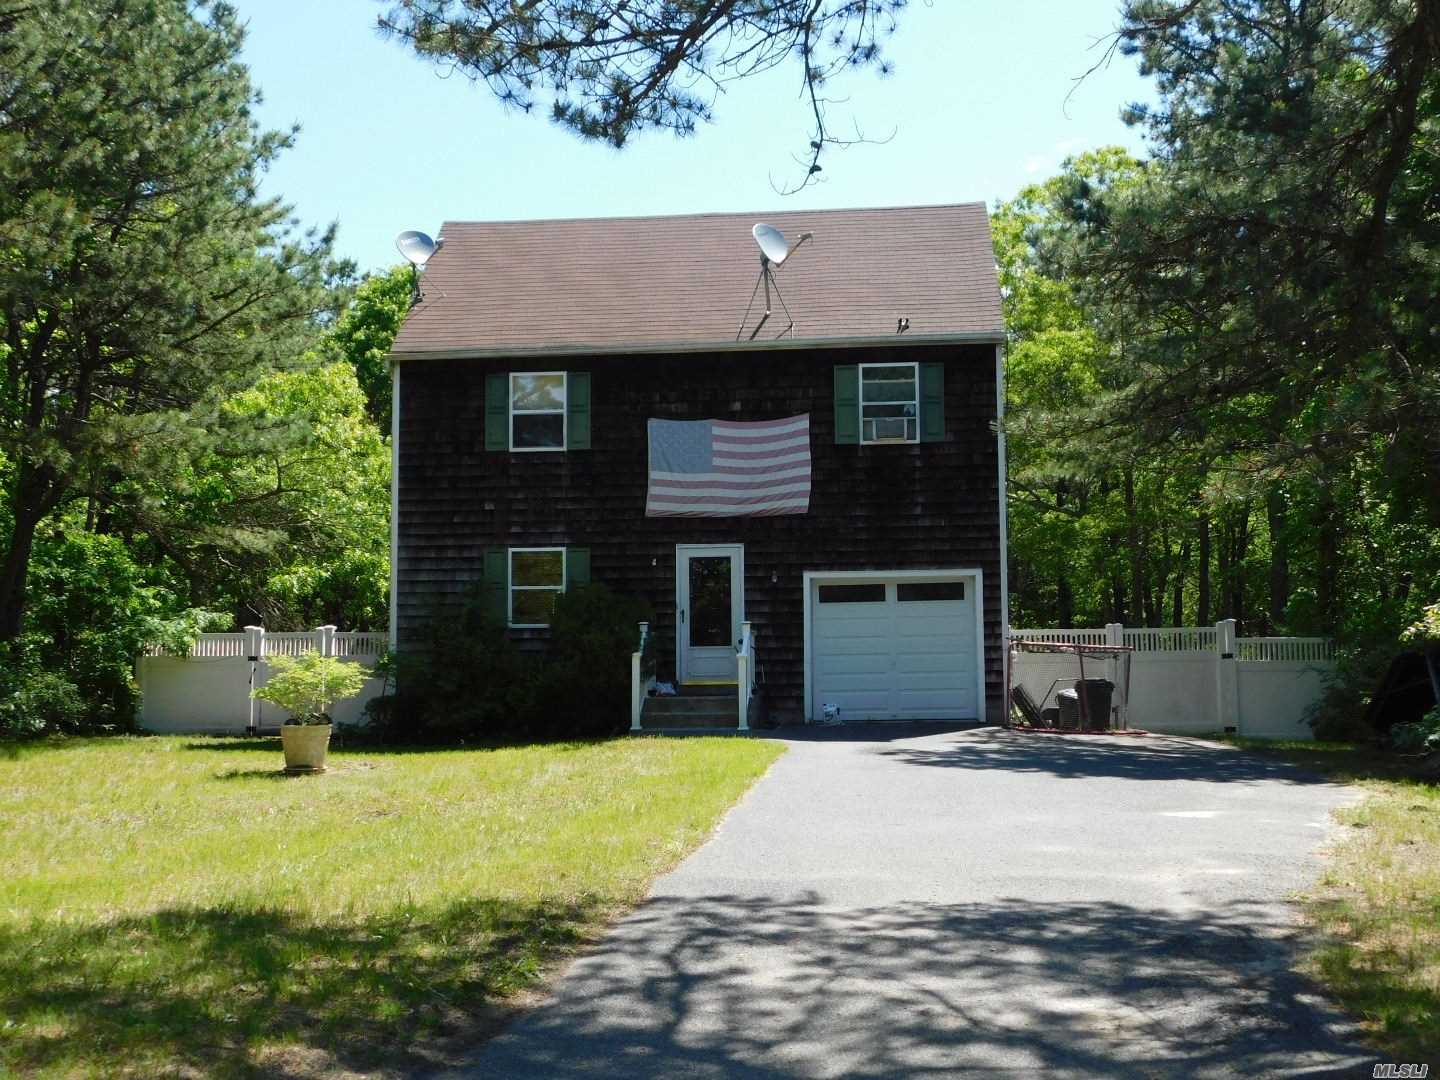 Nice 2 Bedroom Saltbox On Quiet Street, Wood Floors, Large Property . Low Taxes And Close To Beaches And The Hamptons!